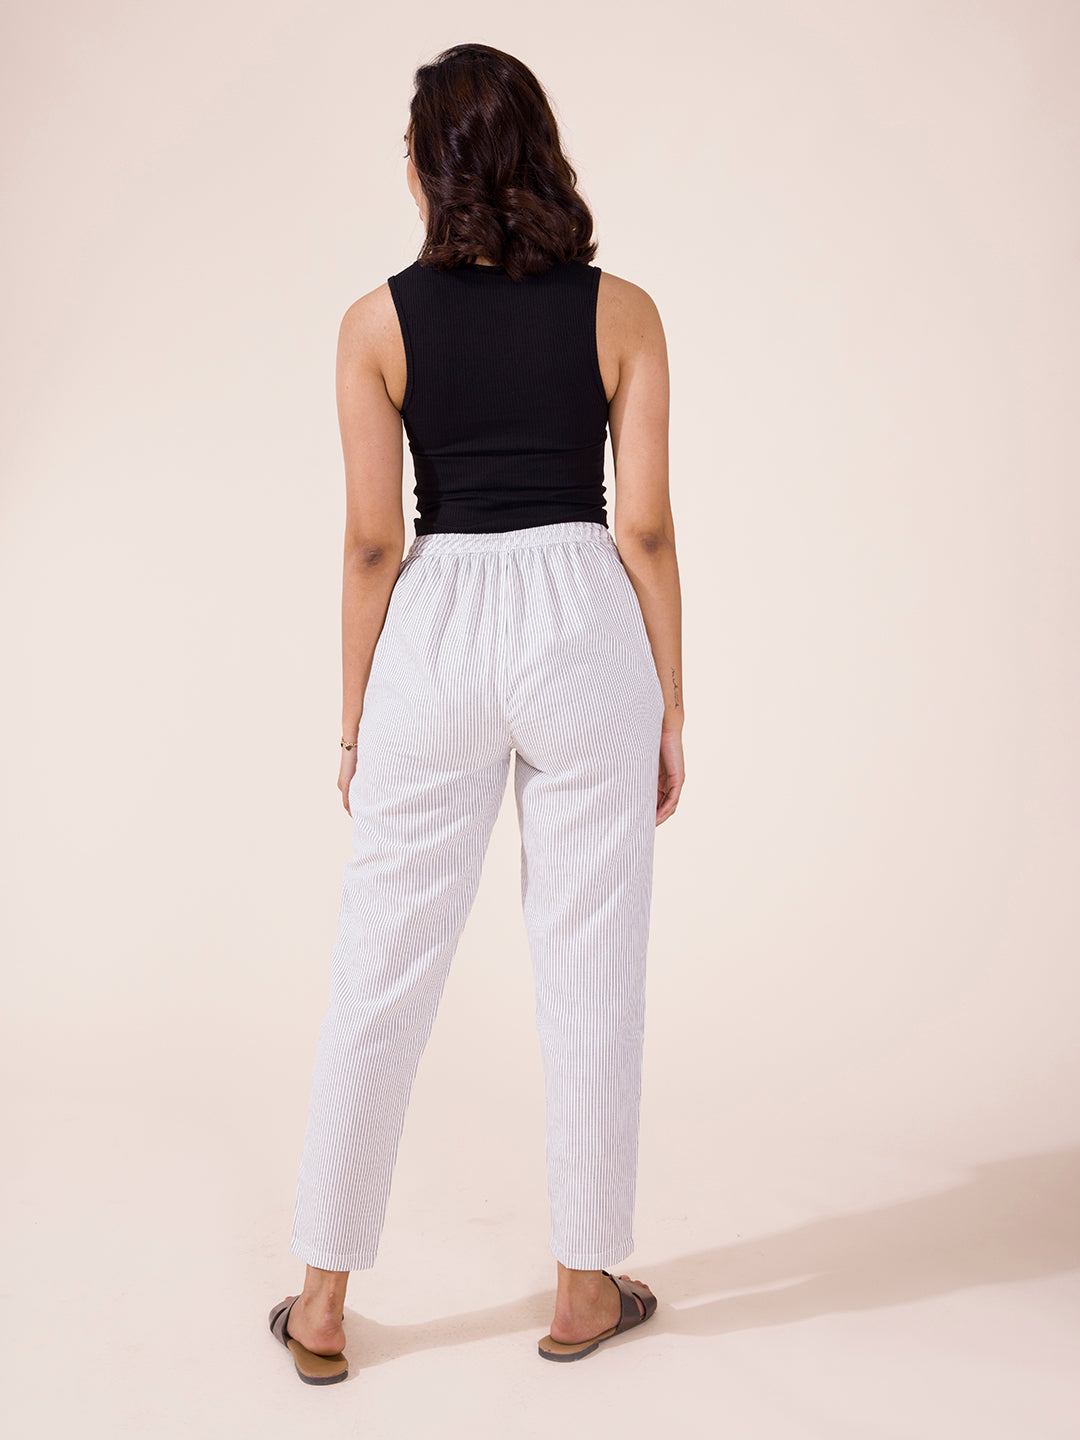 Maeve The Colette Striped Pants | Anthropologie Japan - Women's Clothing,  Accessories & Home